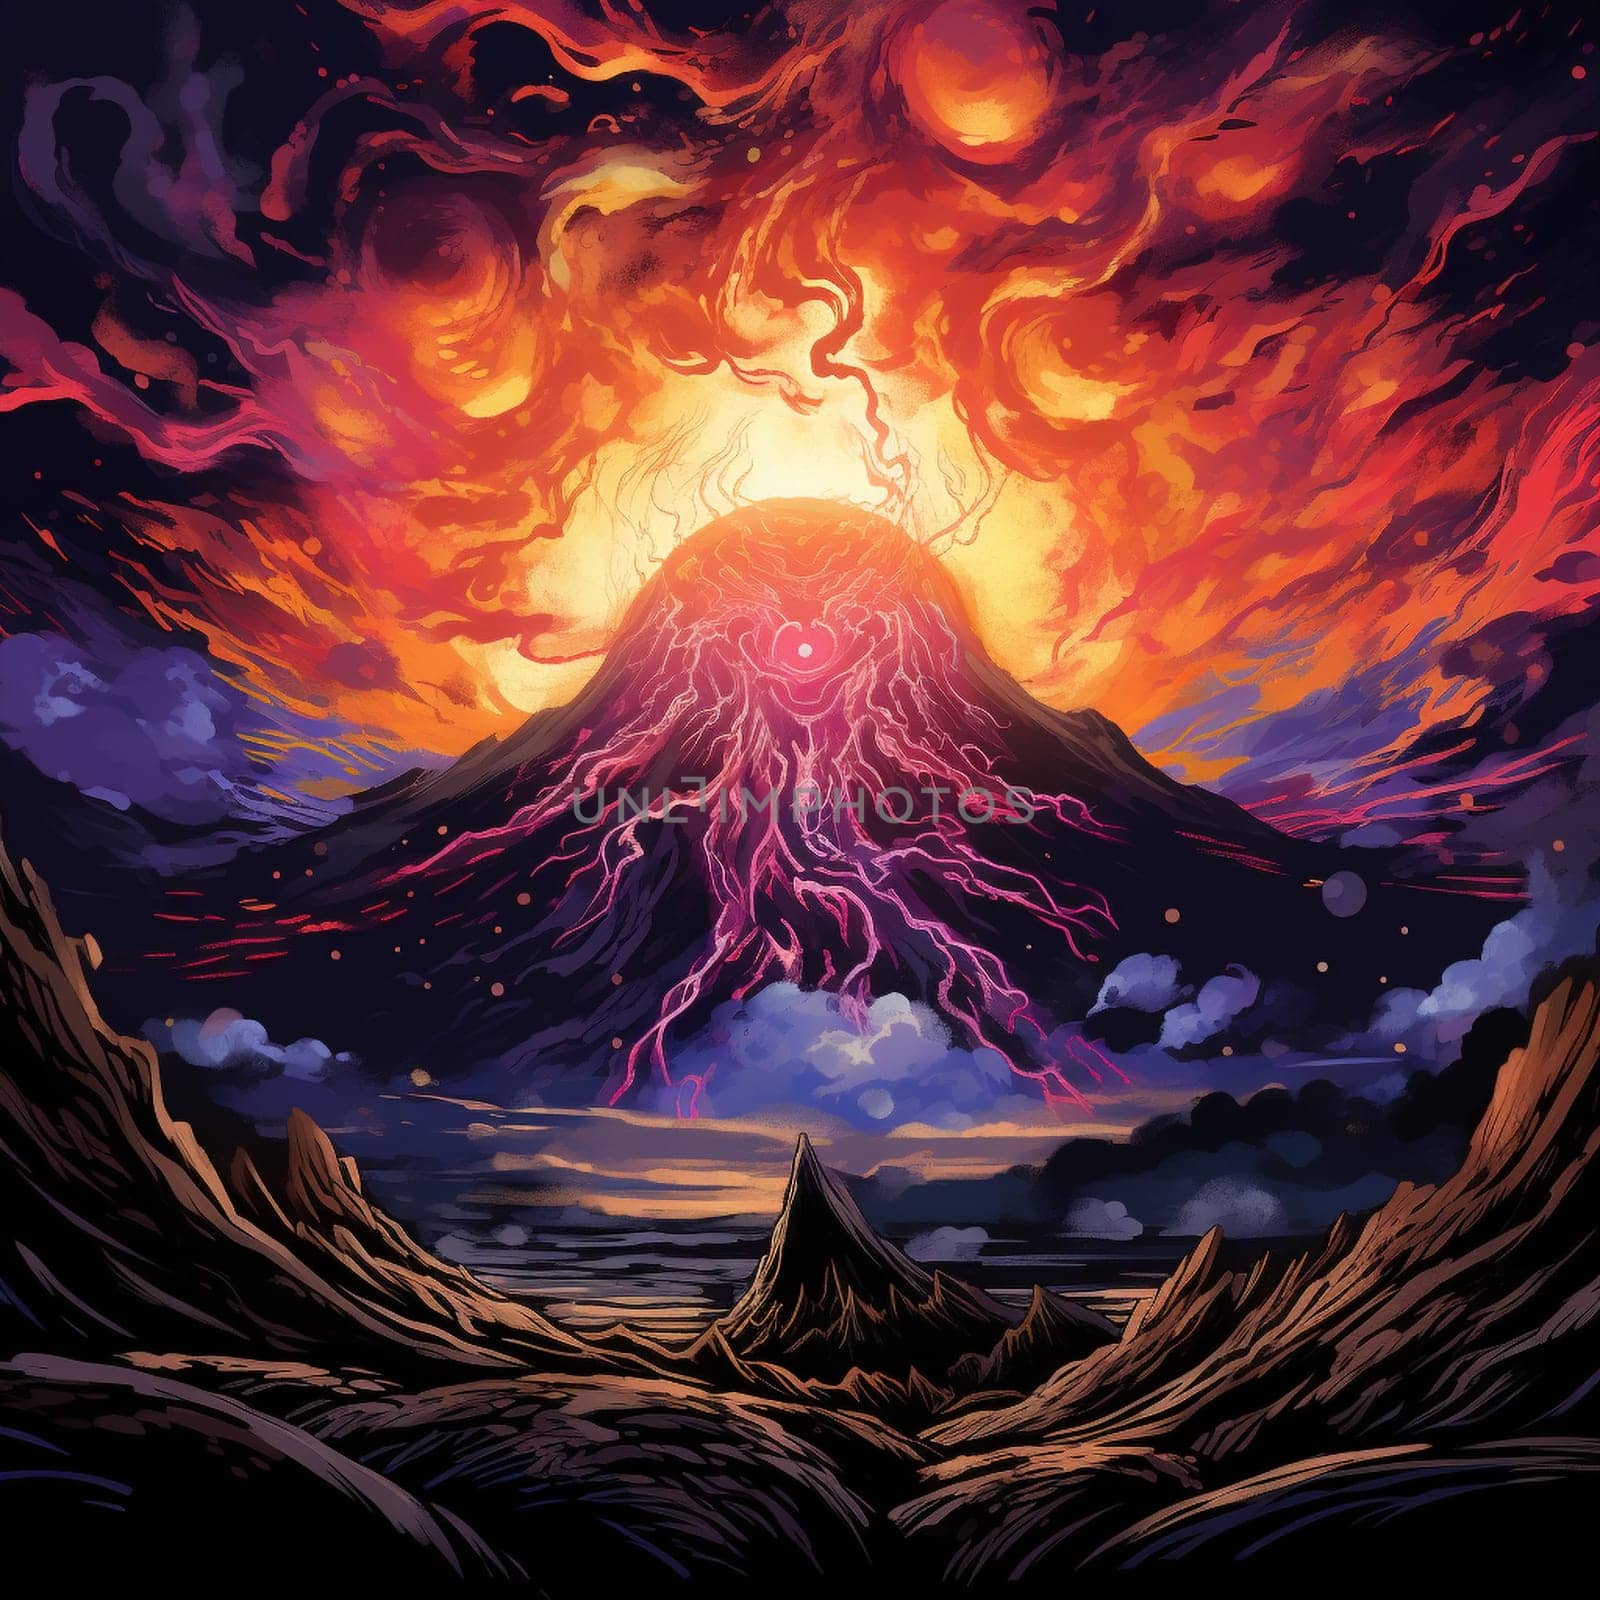 Get ready to be captivated by the mesmerizing scene titled 'Lava's Dance'. In this artwork created in the manga art style, a vibrant and dynamic volcanic eruption takes center stage. The lava gracefully swirls and dances in the air, forming intricate patterns against a dark and dramatic sky. The intense heat, stunning colors, and the raw power of nature combine to create a spectacle that will leave viewers in awe. This mesmerizing display of nature's fury evokes a wide range of emotions, from wonder and fascination to a sense of danger and urgency. The scene deliberately avoids any identifiable landmarks or logos, focusing solely on the beauty and spectacle of the volcanic eruption.